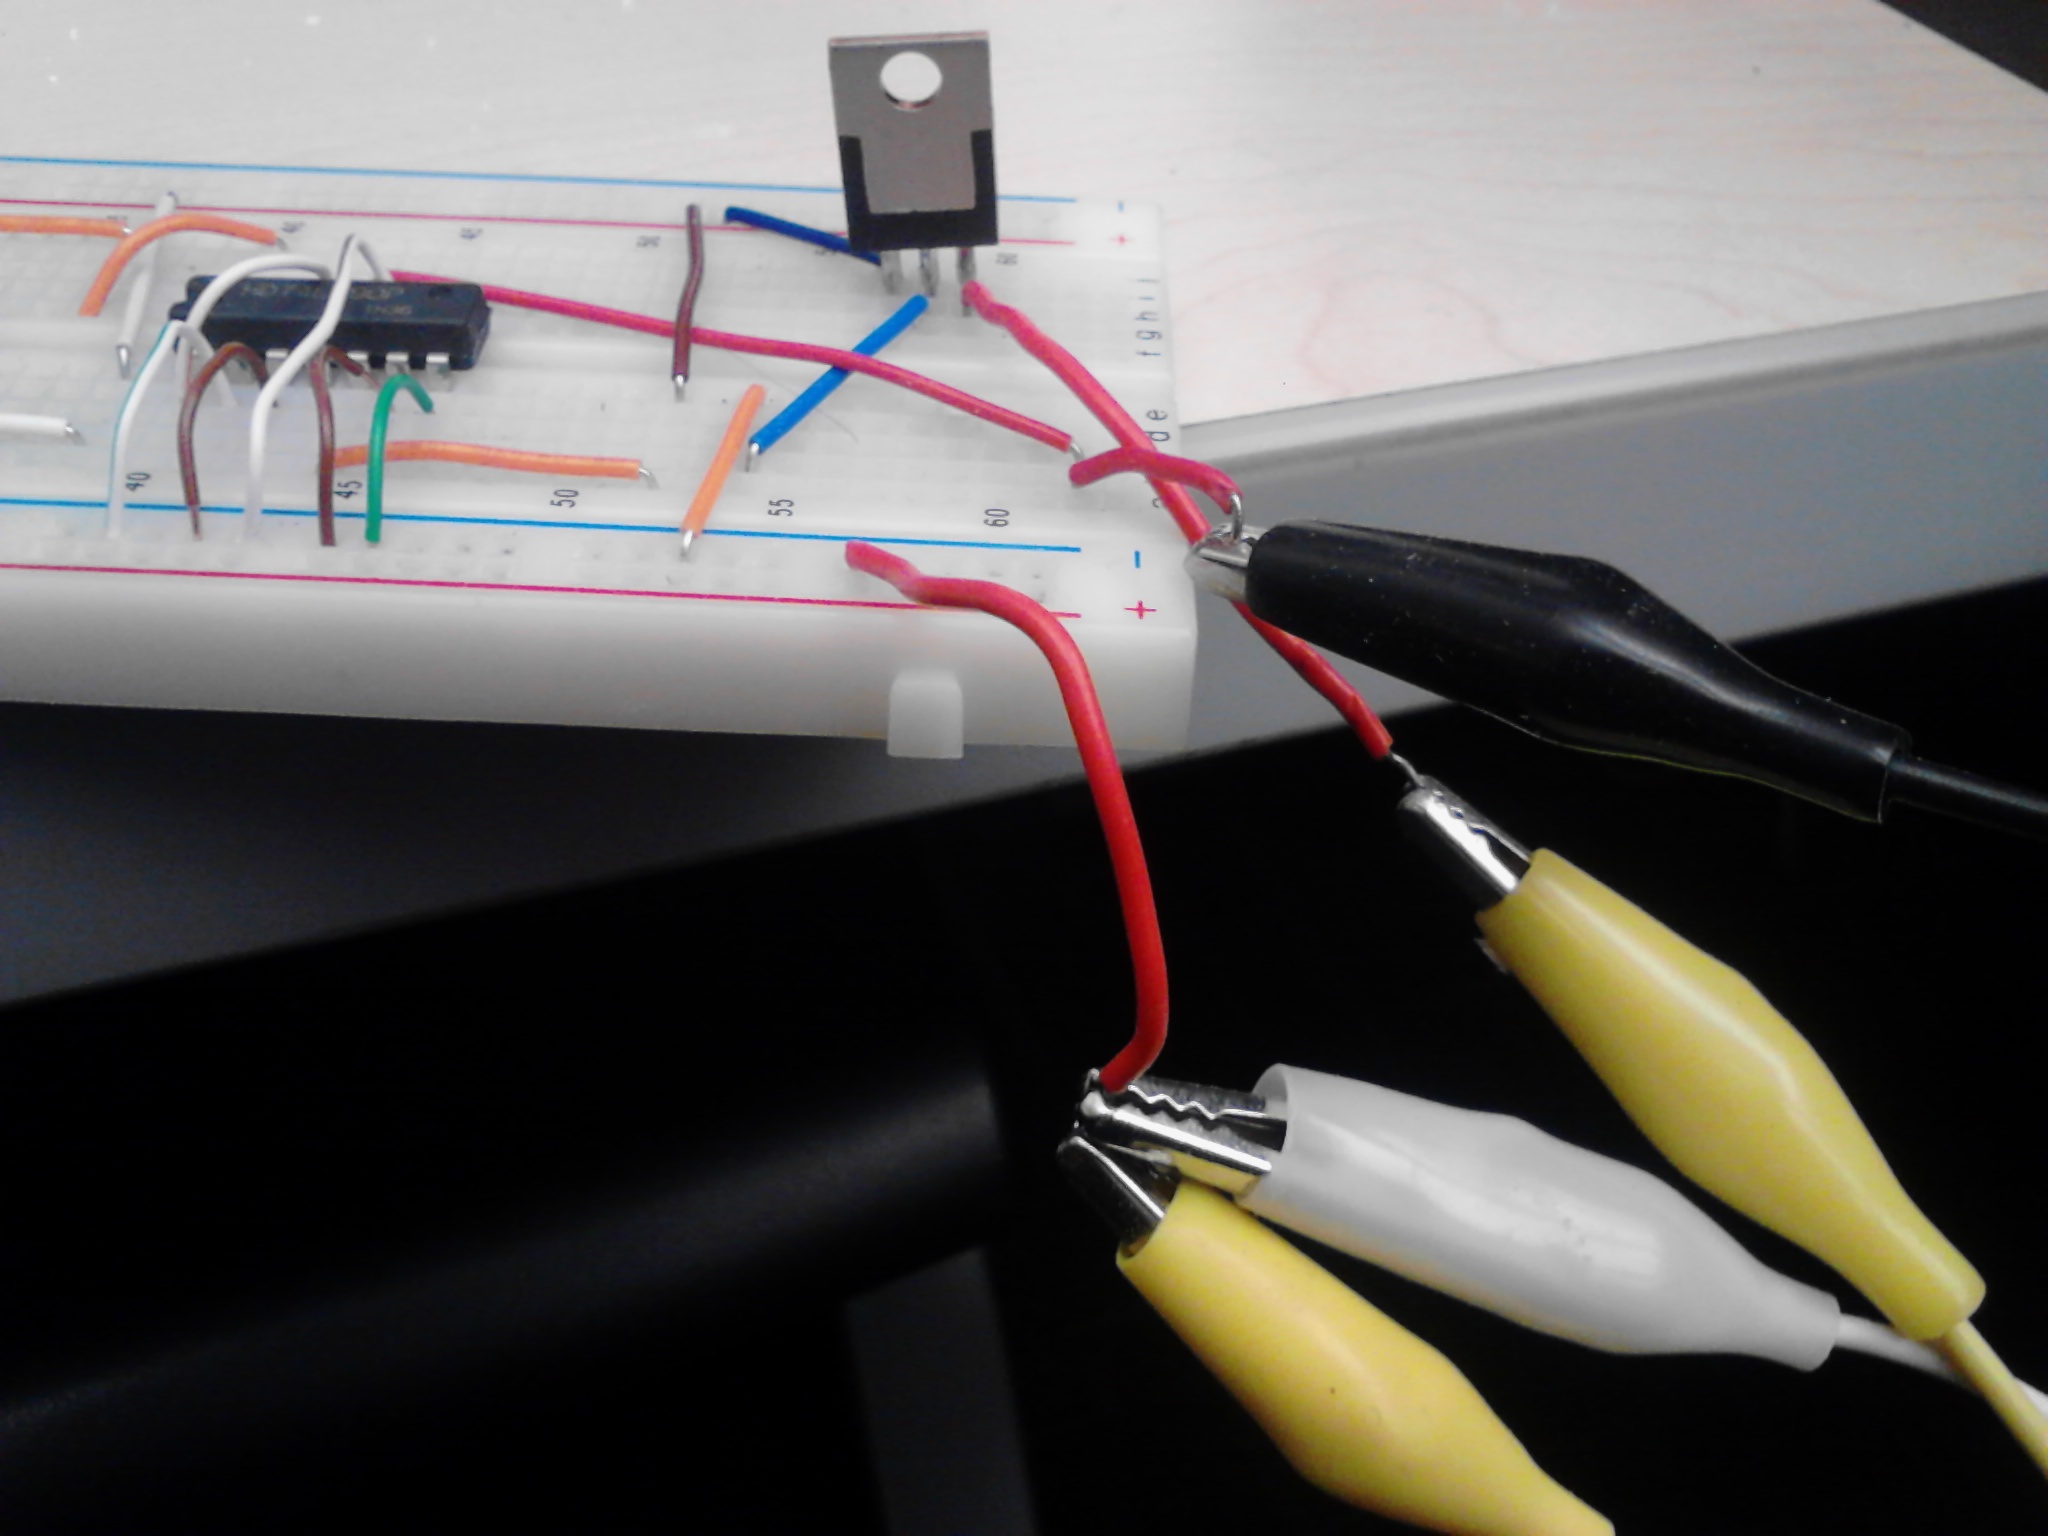 Alligator clips hooked up to wires and oscillator